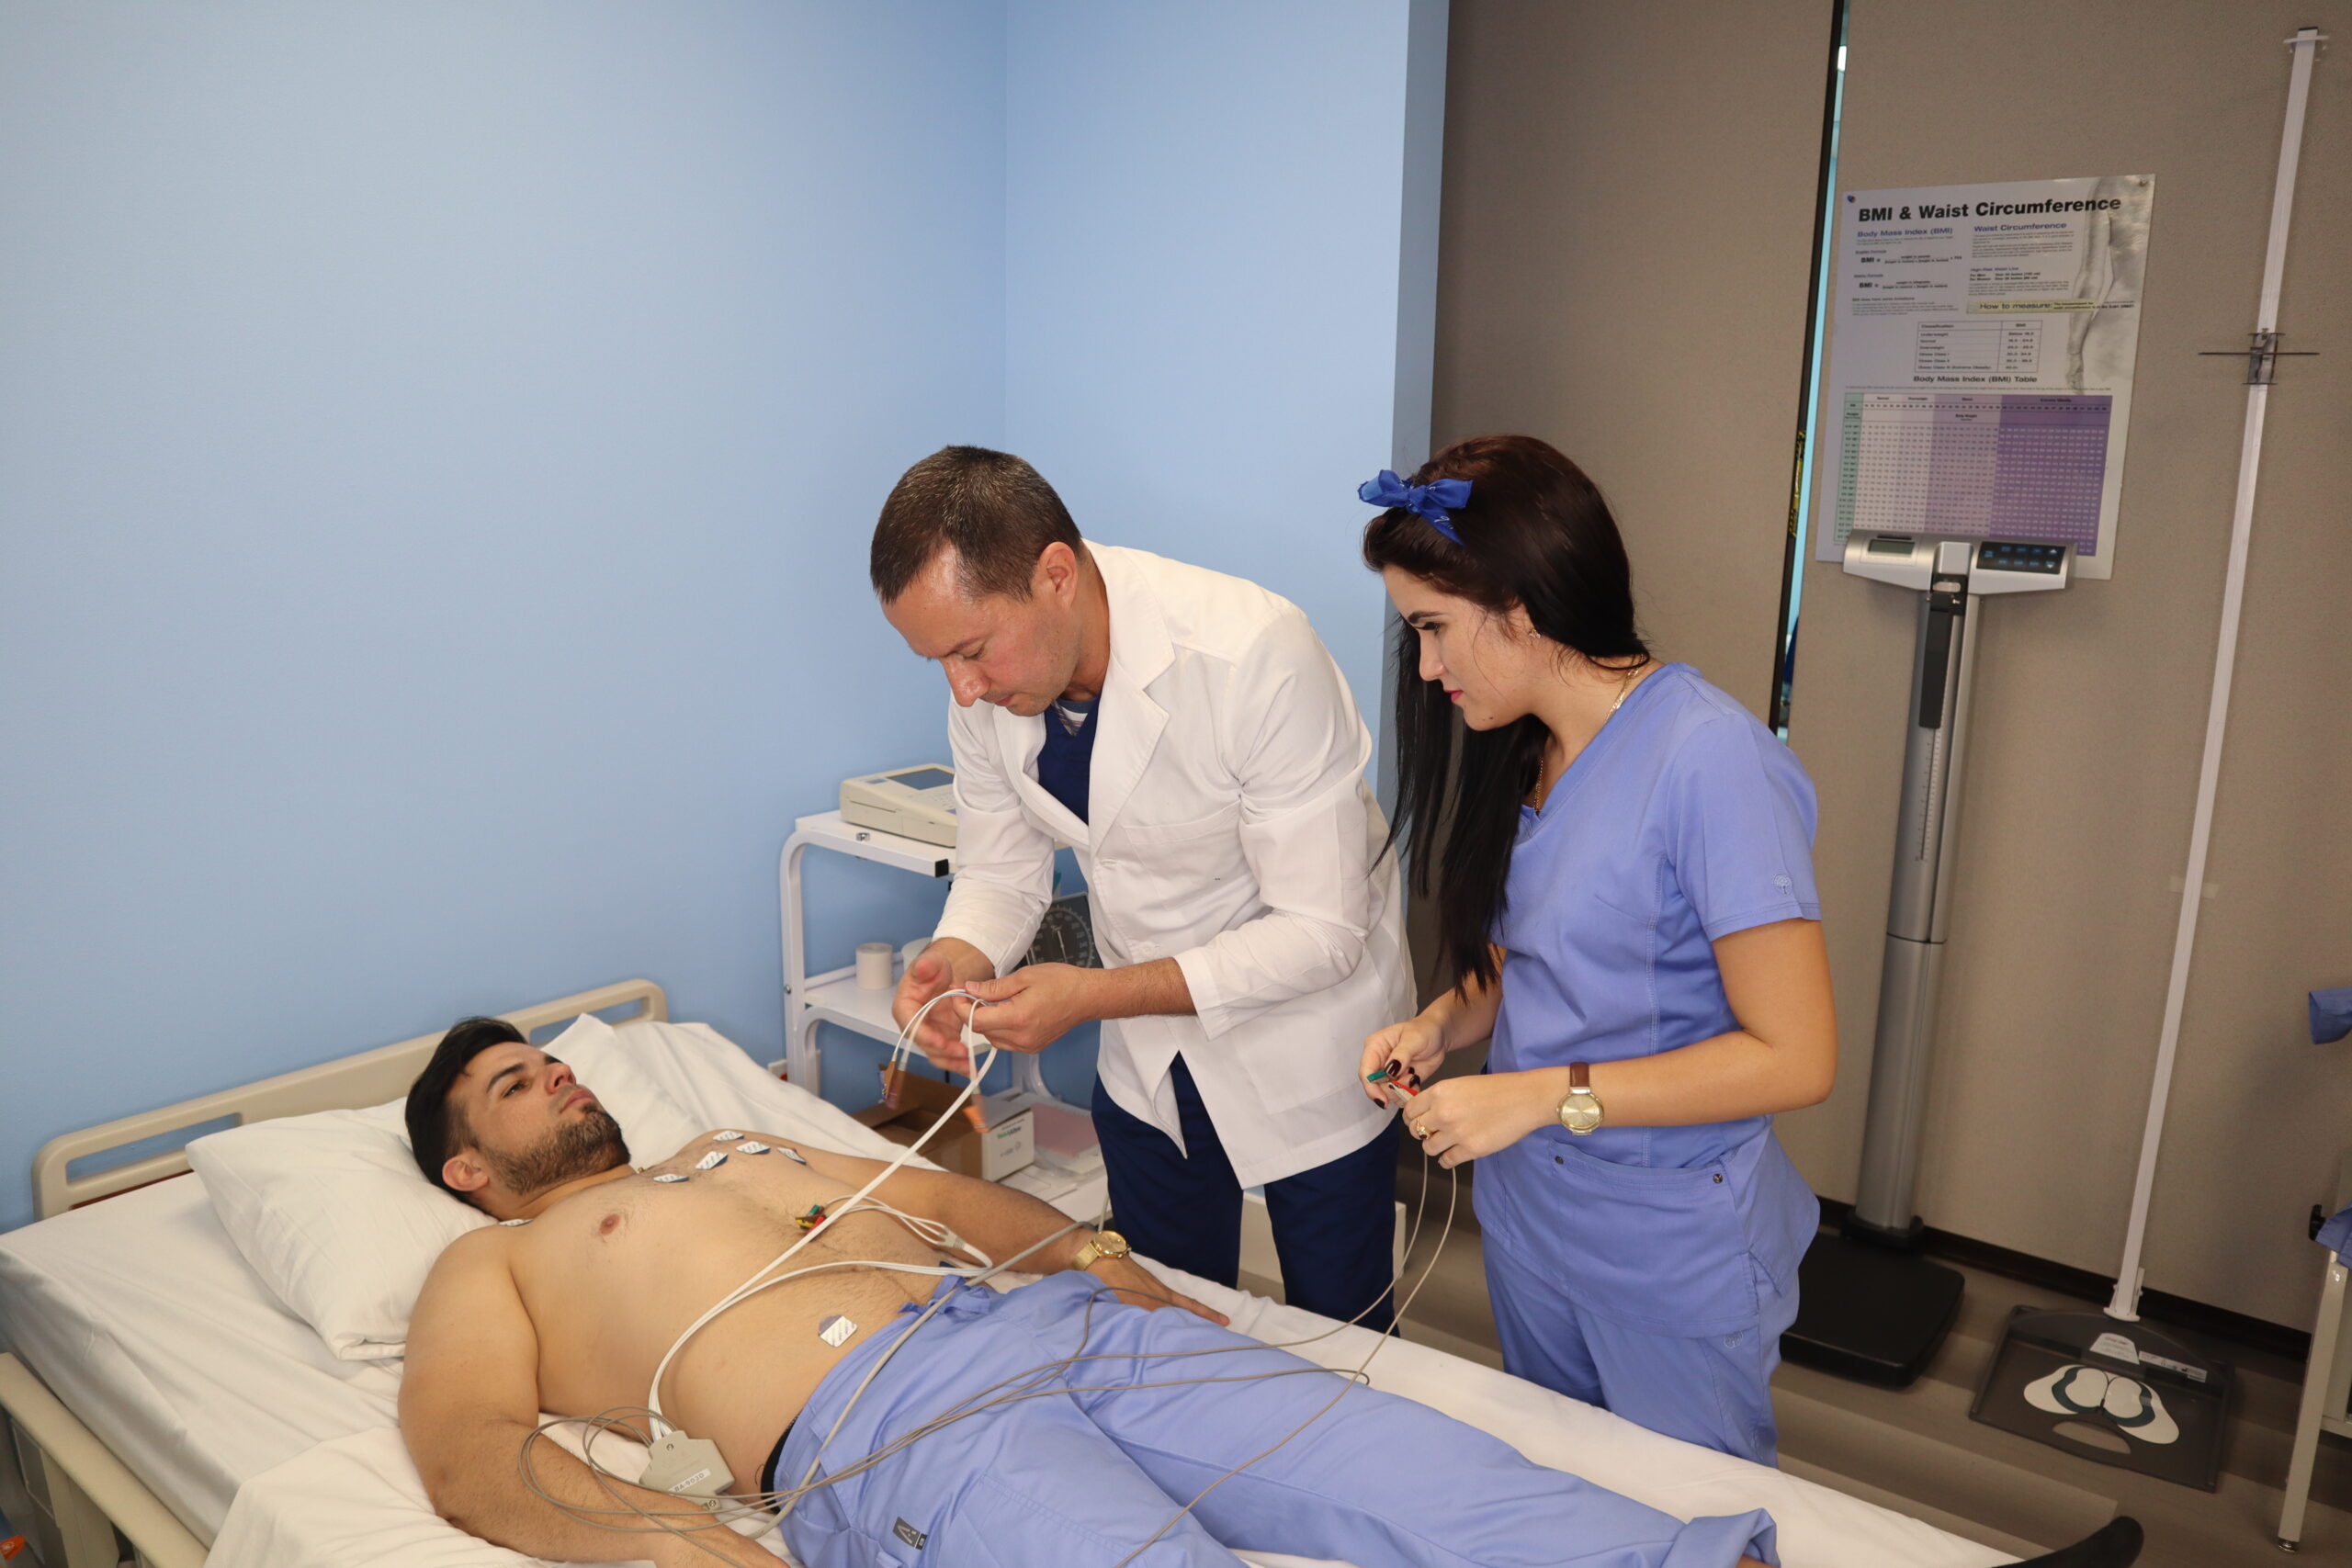 An instructor assists two students who are practicing in a skills lab, one is lying in a hospital bed while the other student stands next to the instructor and observes